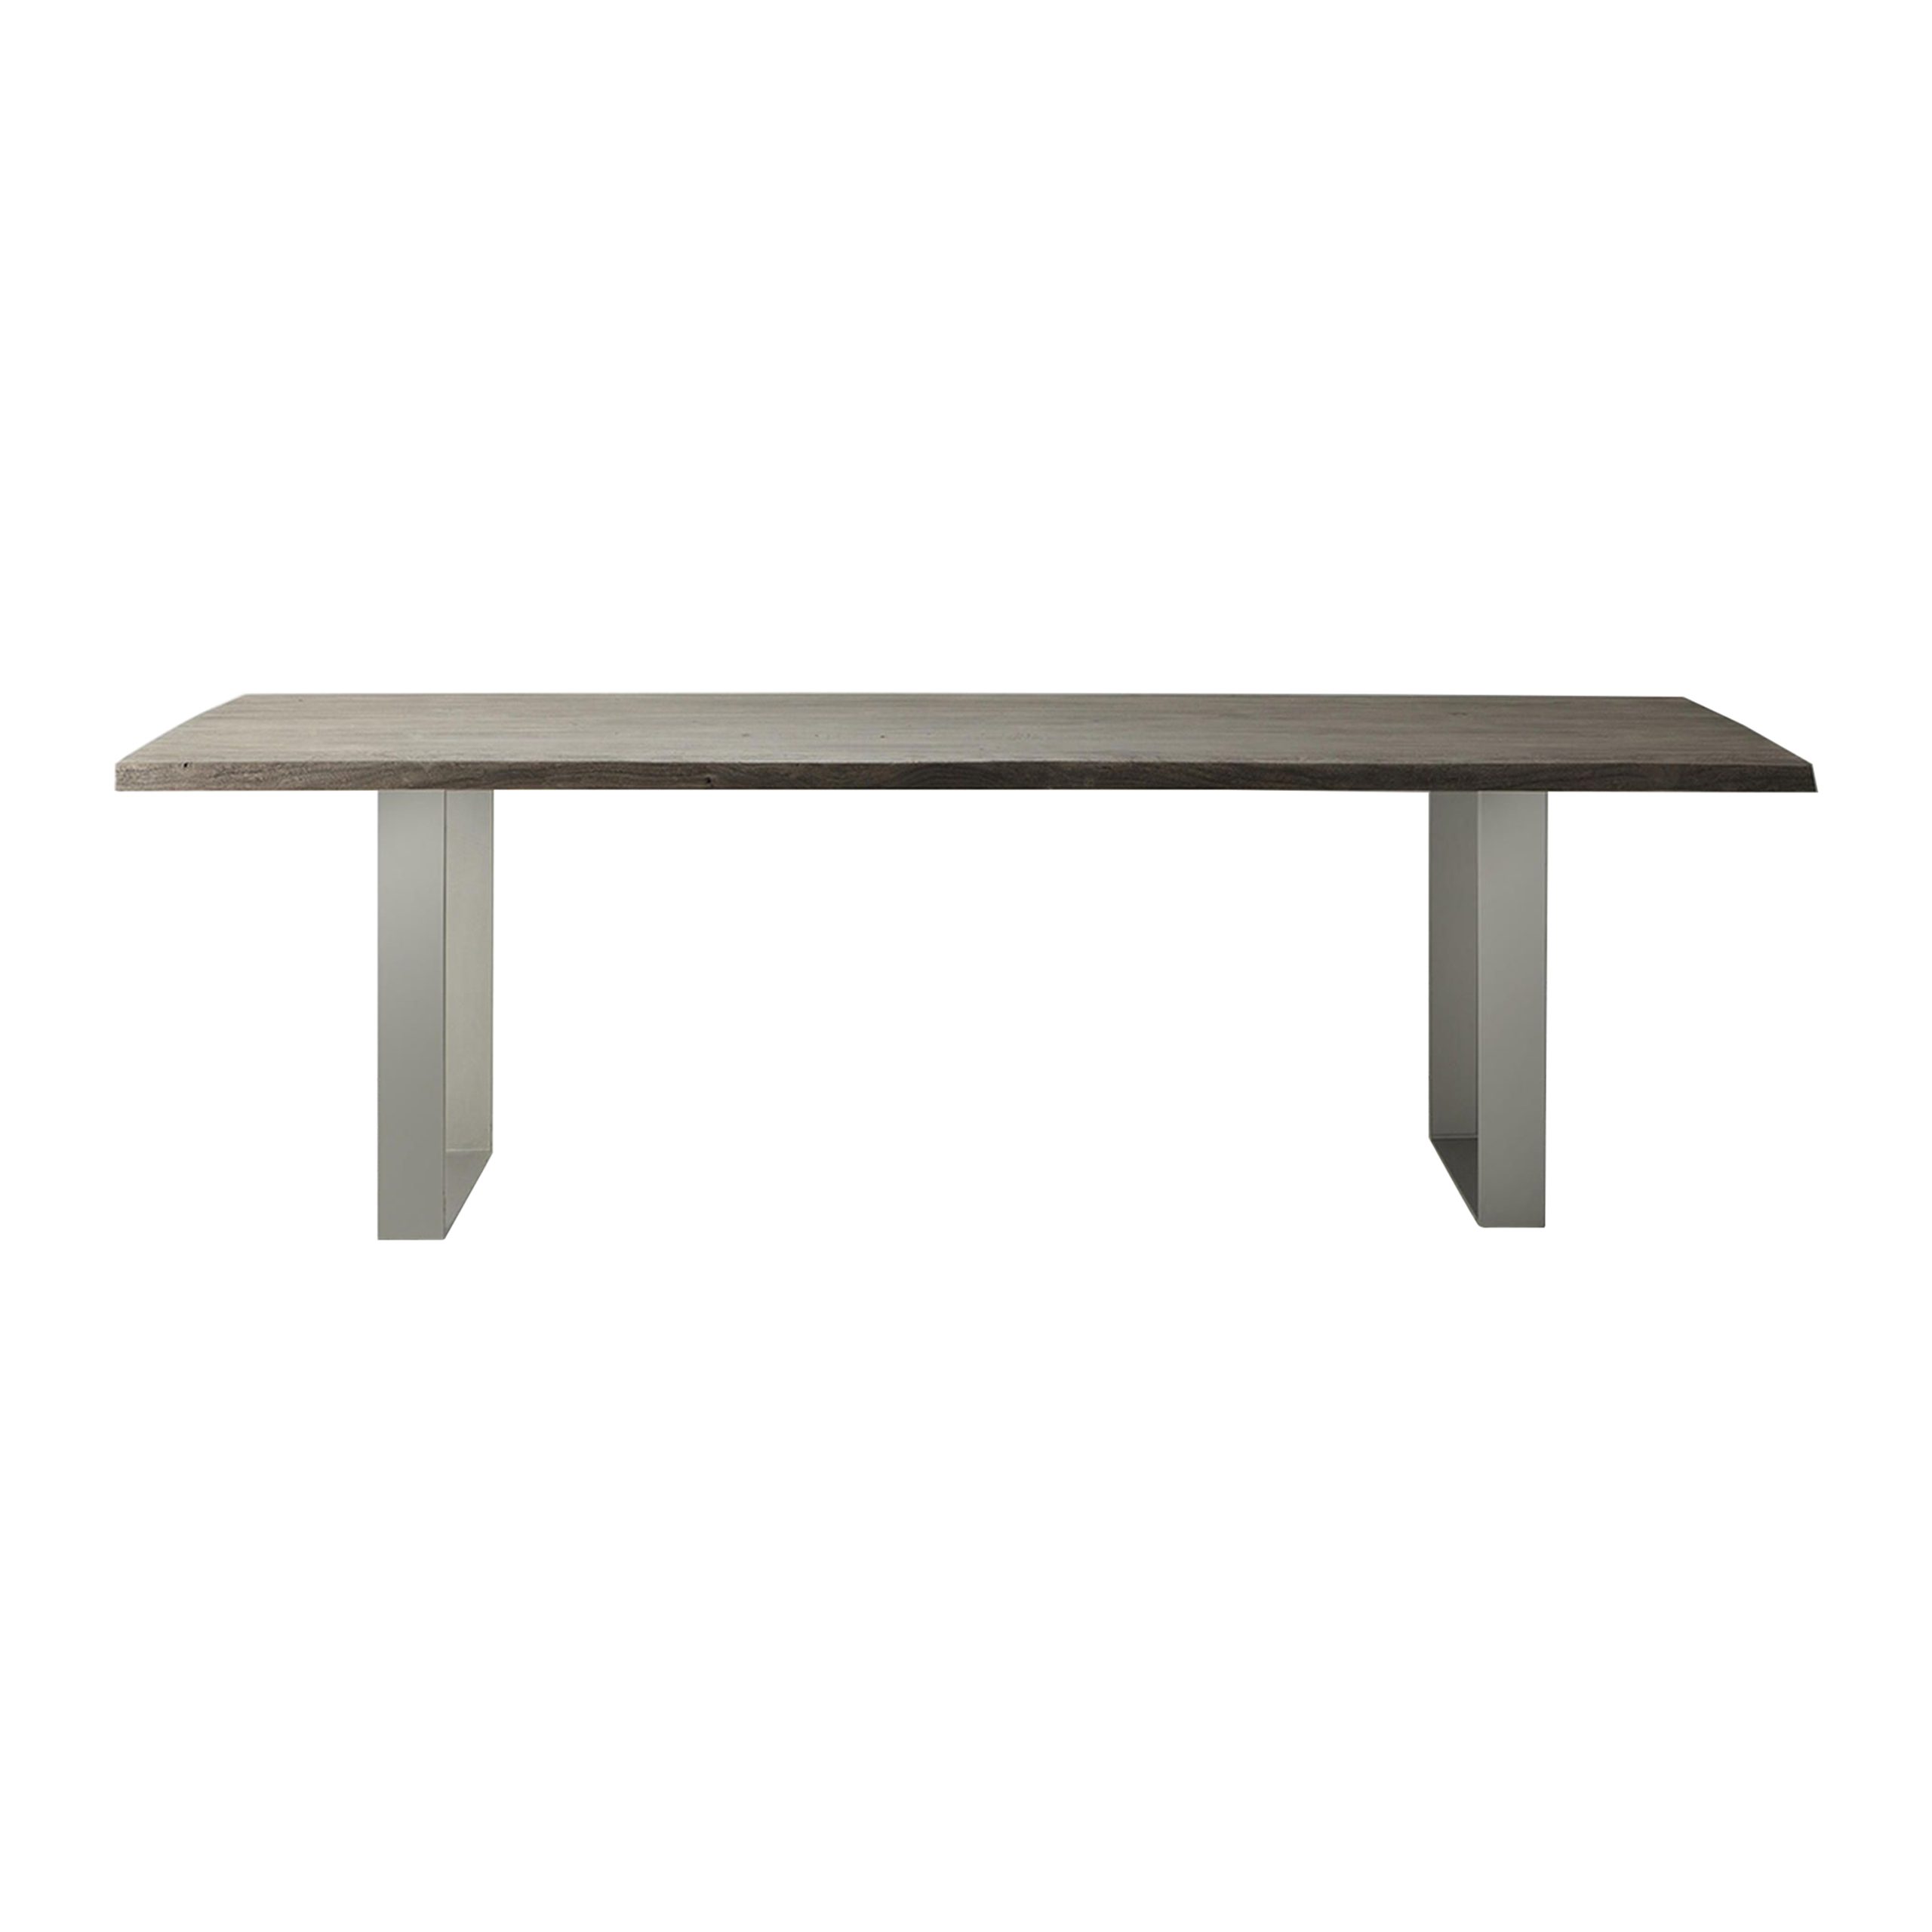 Gallery Direct Huntington Dining Table Grey